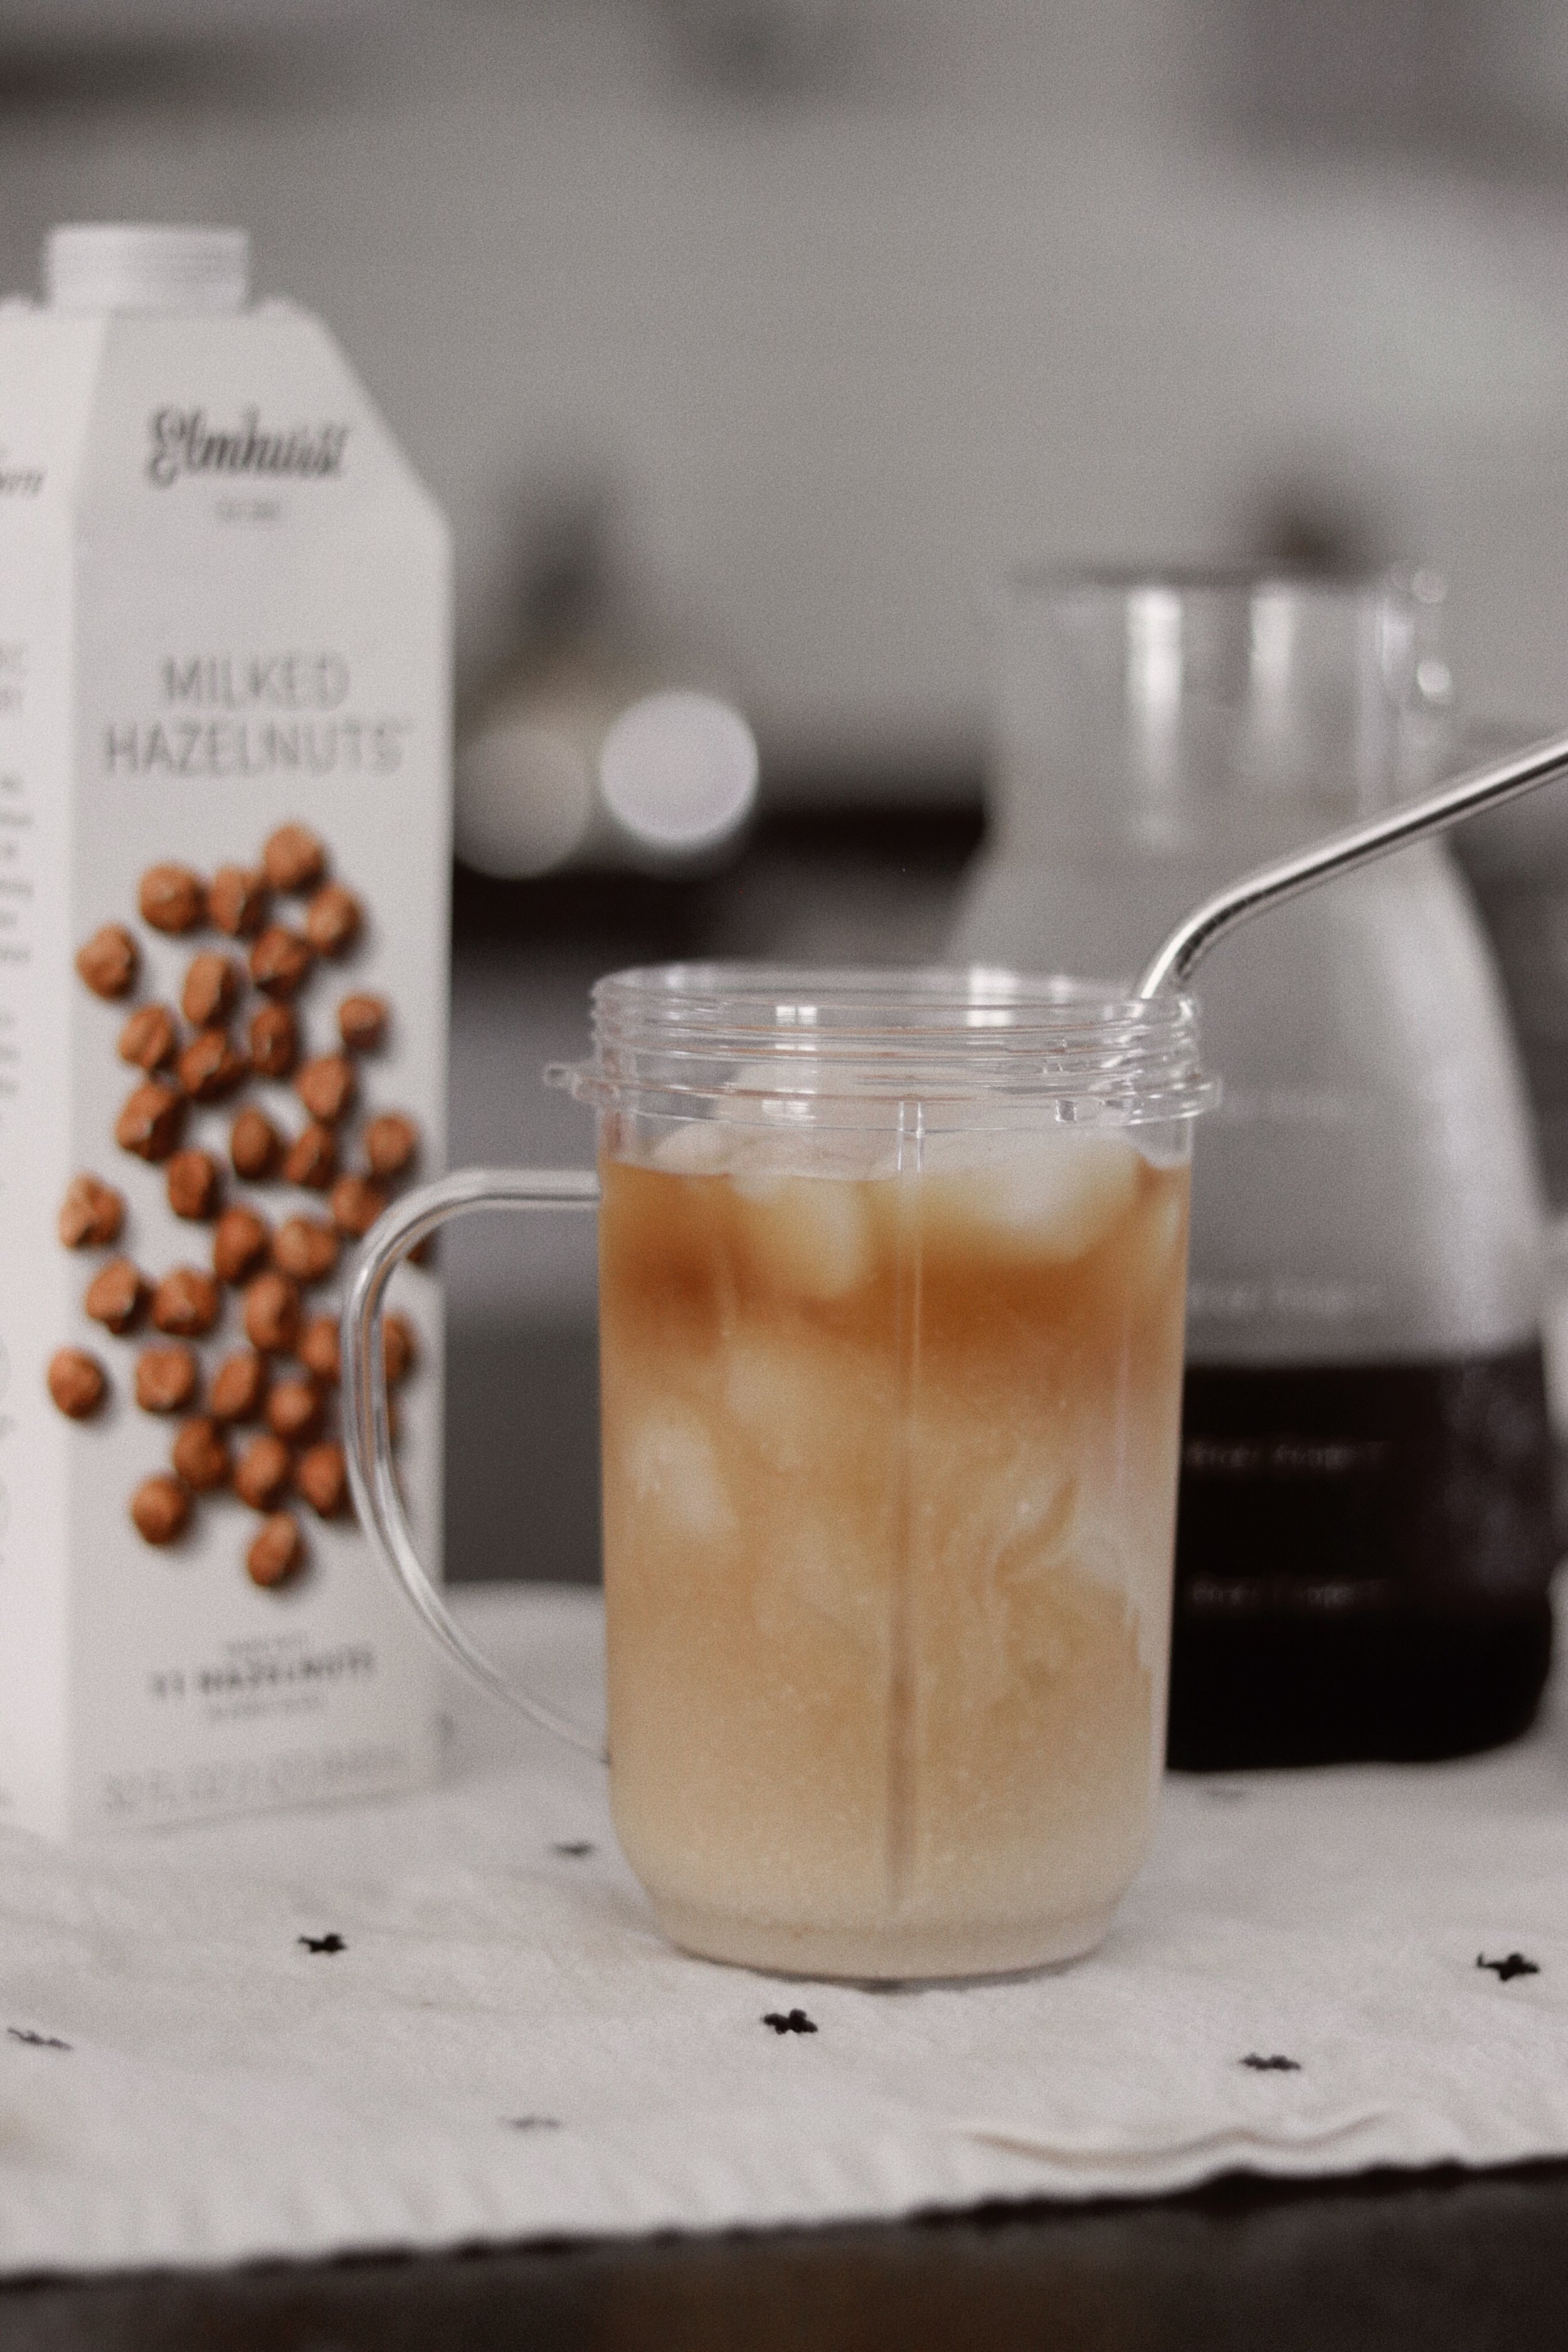 How to make Homemade Cold Brew Coffee {Recipe} - The Schmidty Wife